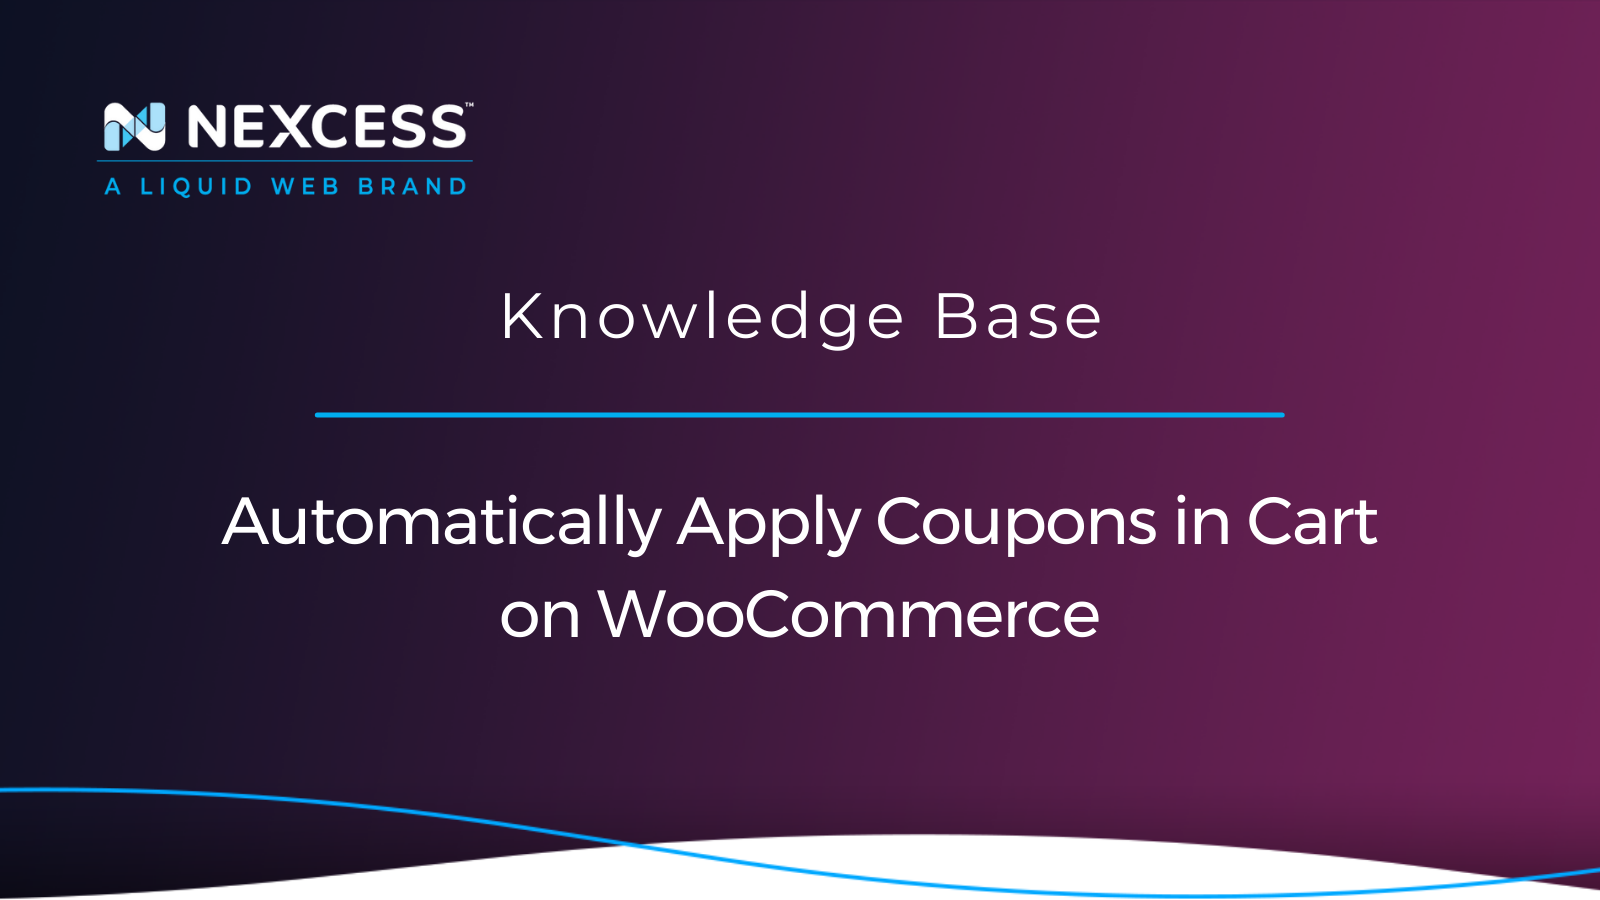 Automatically Apply Coupons in Cart on WooCommerce